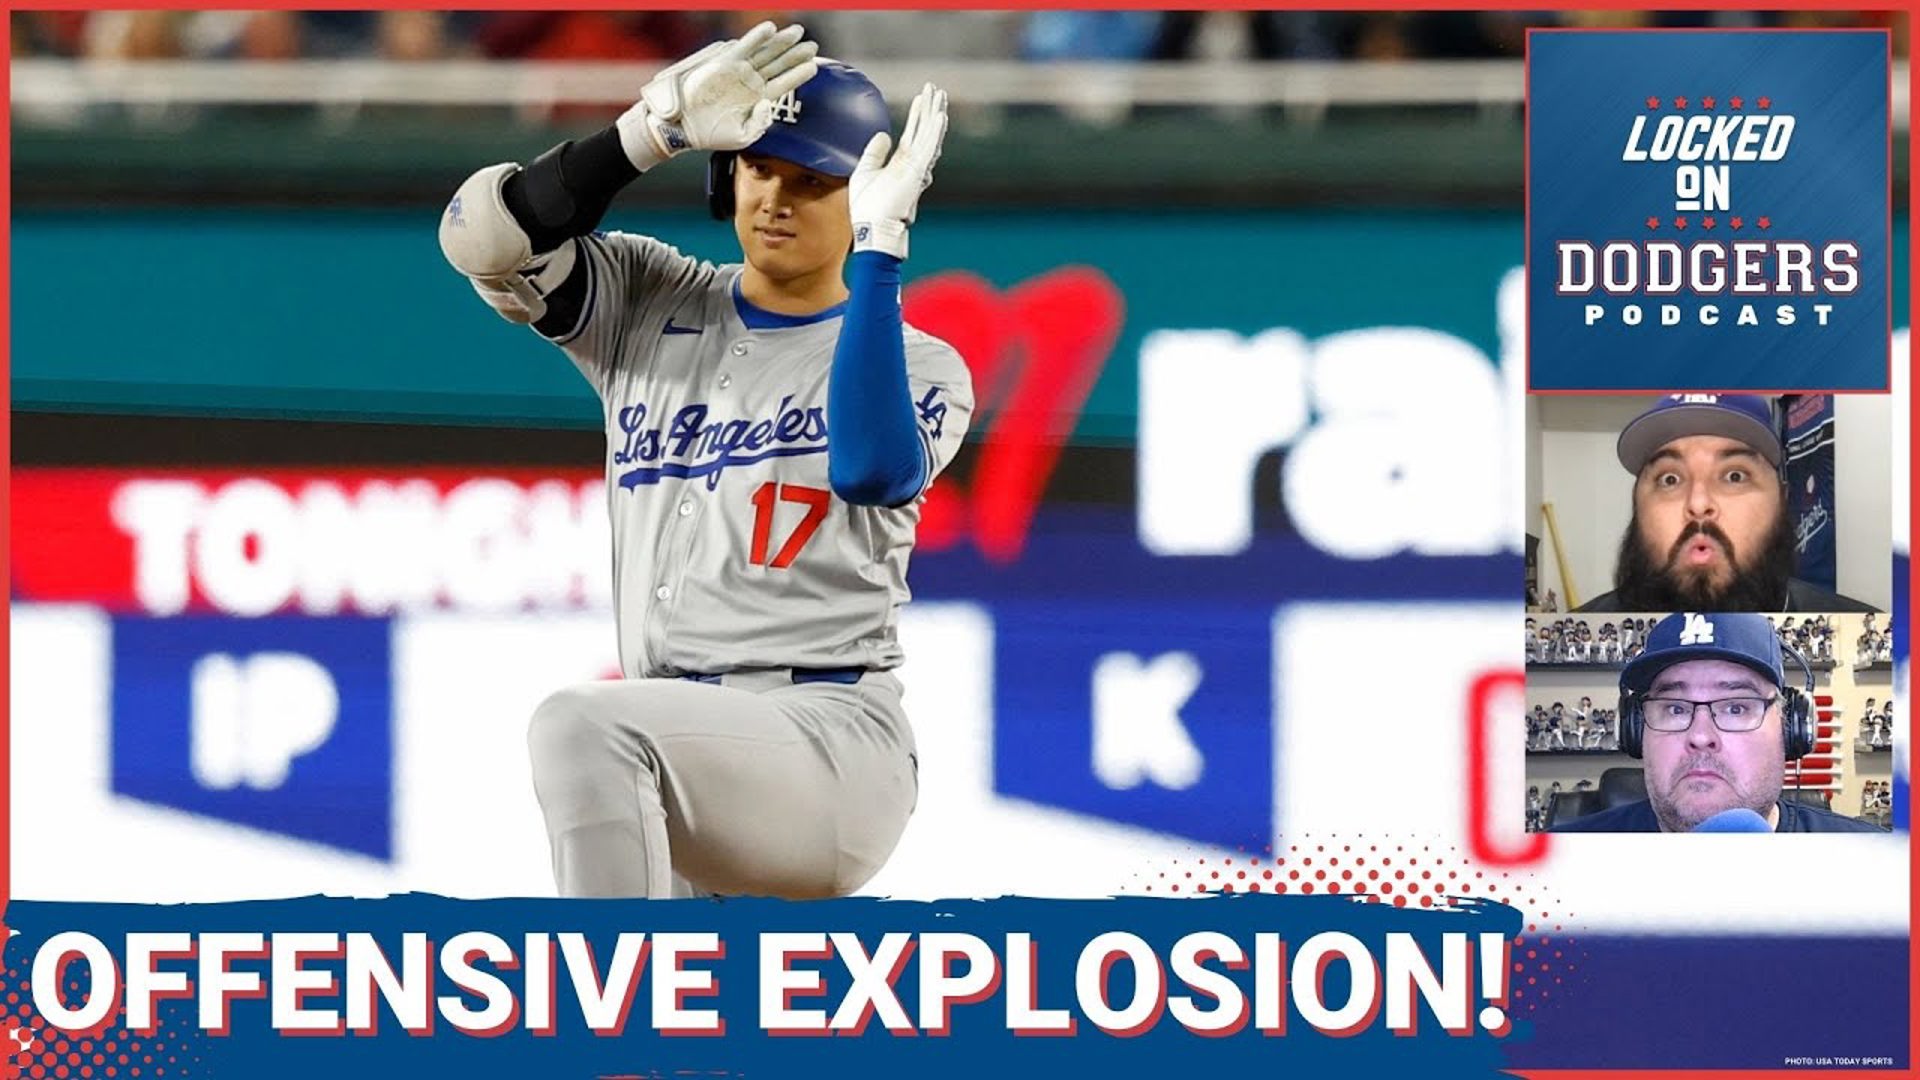 The Los Angeles Dodgers offense broke out and scored 11 runs on 20 hits in a rout of the Nationals. Shohei Ohtani hit three doubles and leads the league